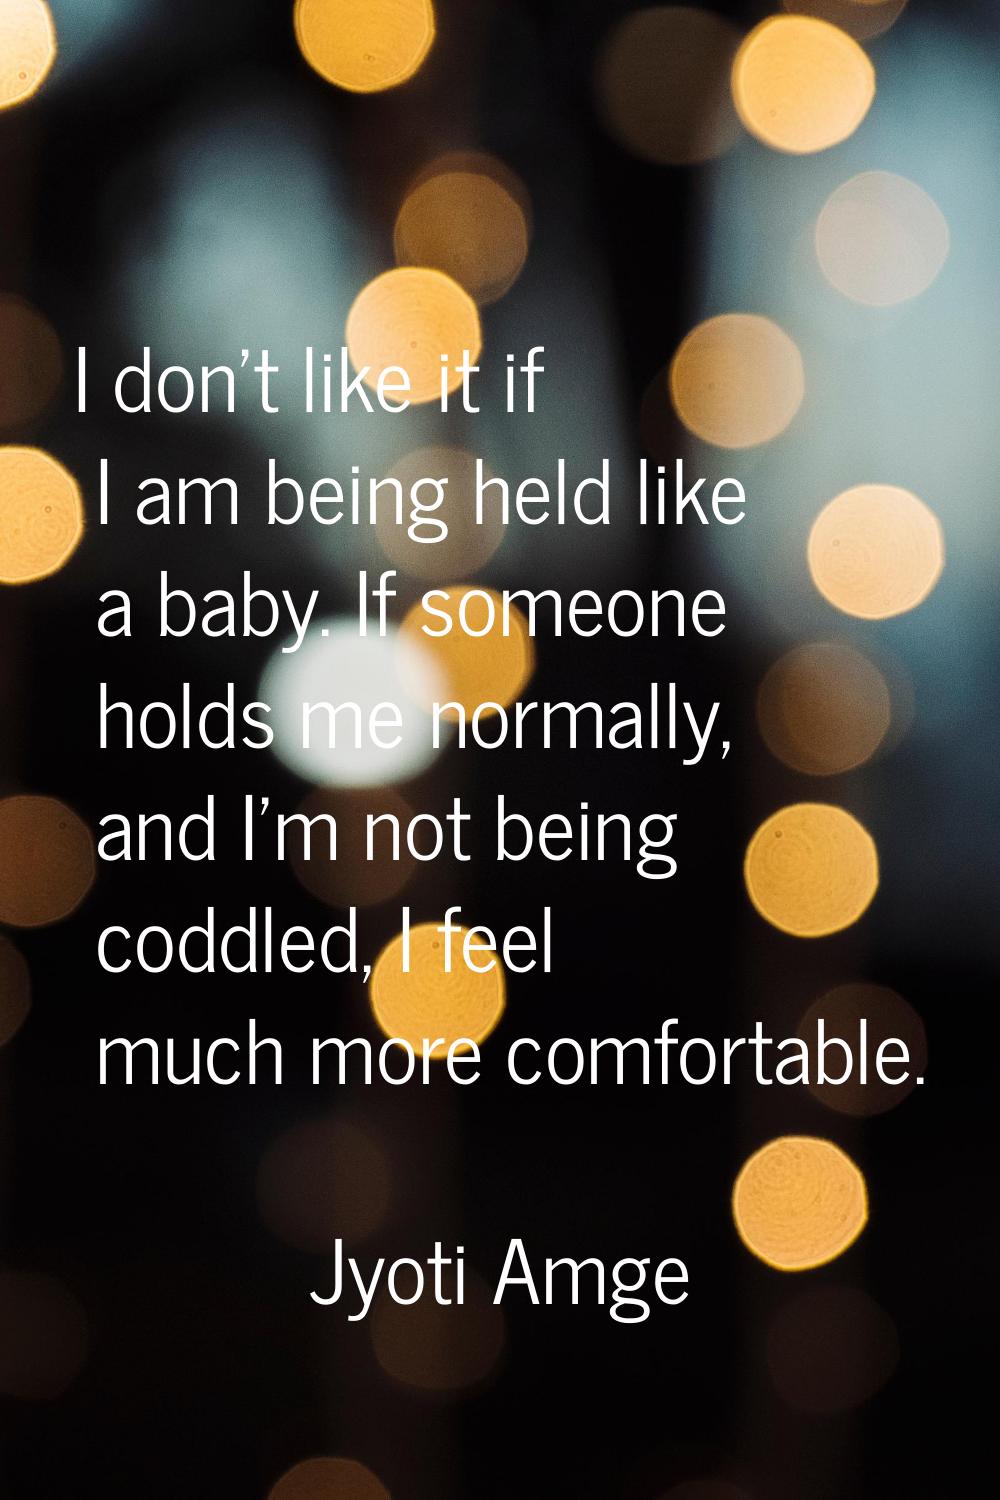 I don't like it if I am being held like a baby. If someone holds me normally, and I'm not being cod